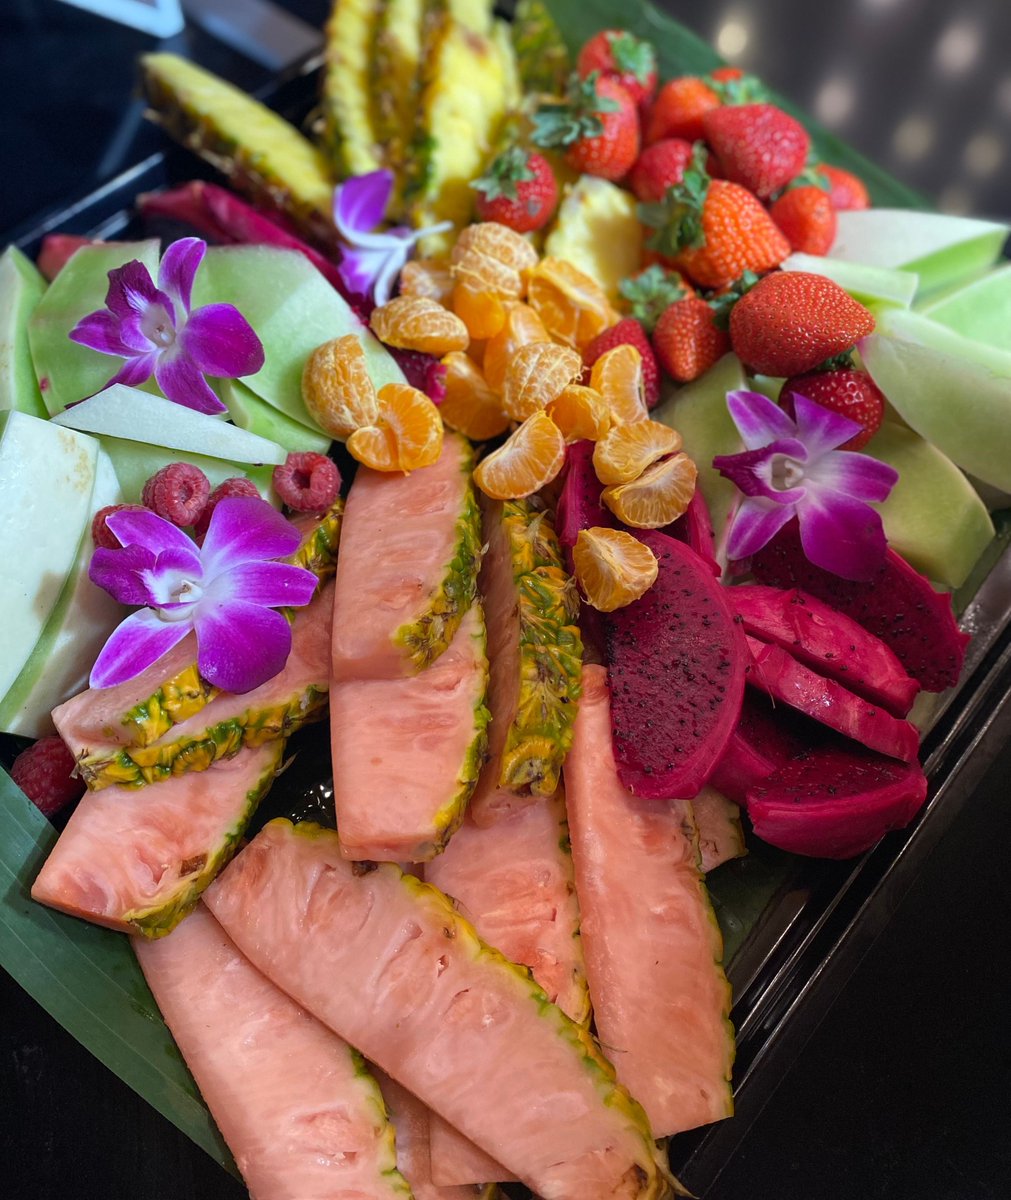 YUM! Day game at @cryptocomarena calls for an extra-large fruit platter in the Delta Club 🤩🍉🍍🍓🍊

@LAClippers vs @chicagobulls tips off soon 🏀 Who's taking home the W today!?

#MelissasProduce #HealthyOptions #ClipperNation #PinkglowPineapple #SeasonsBest